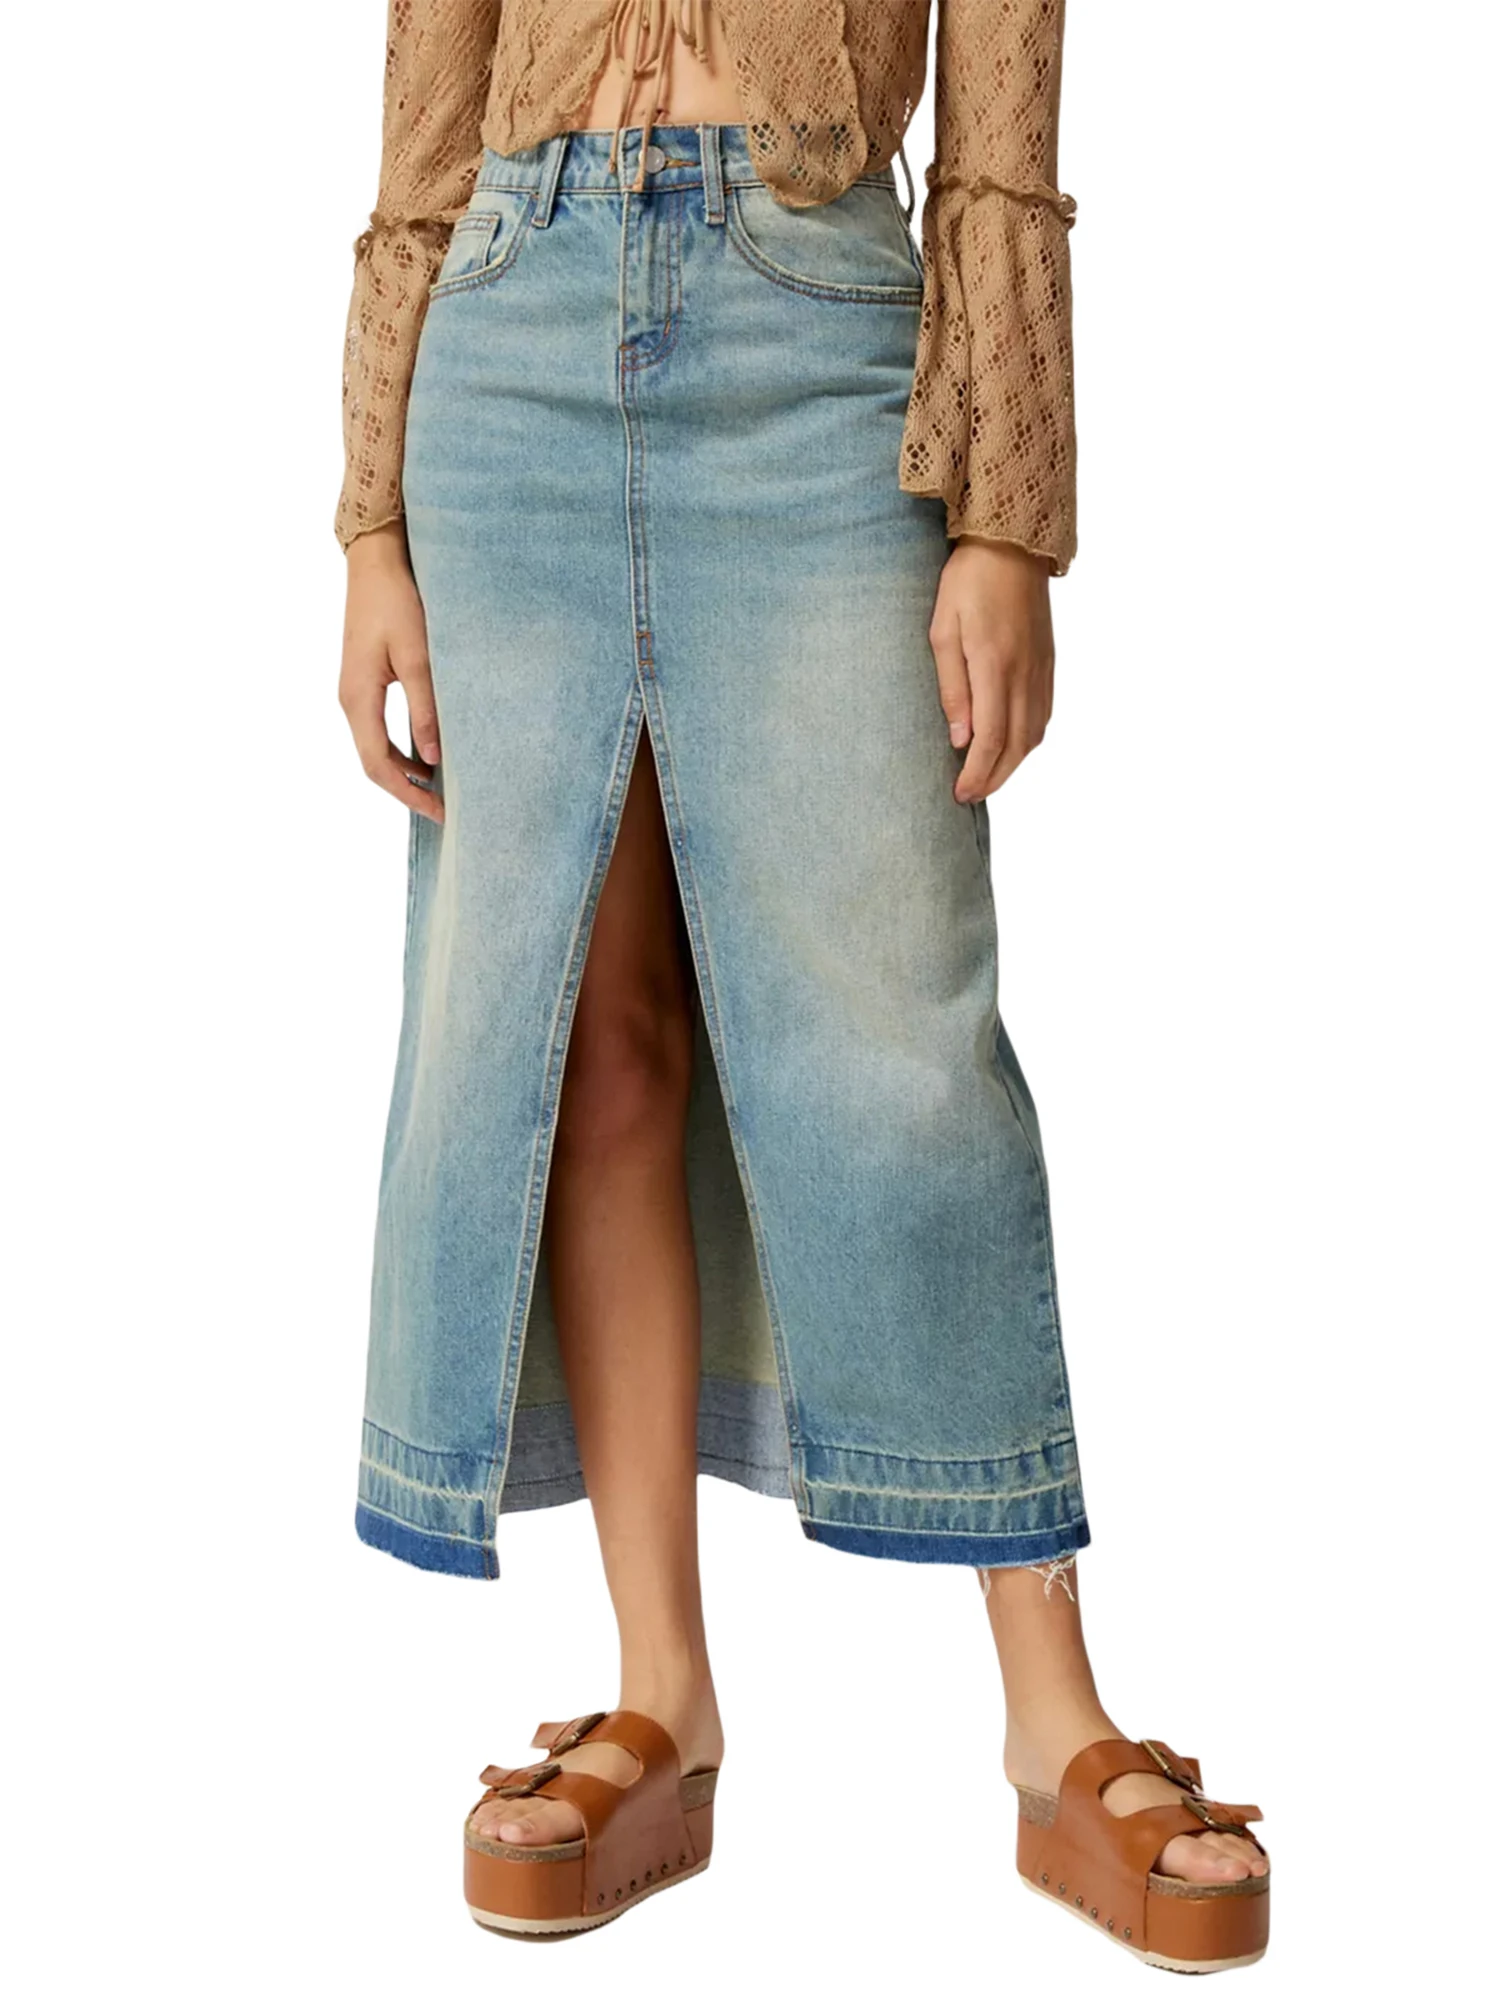 

Women s Vintage Washed Denim Skirt with Distressed Details and Fringed Hemline - Stylish High Waist A-Line Skirt for Everyday